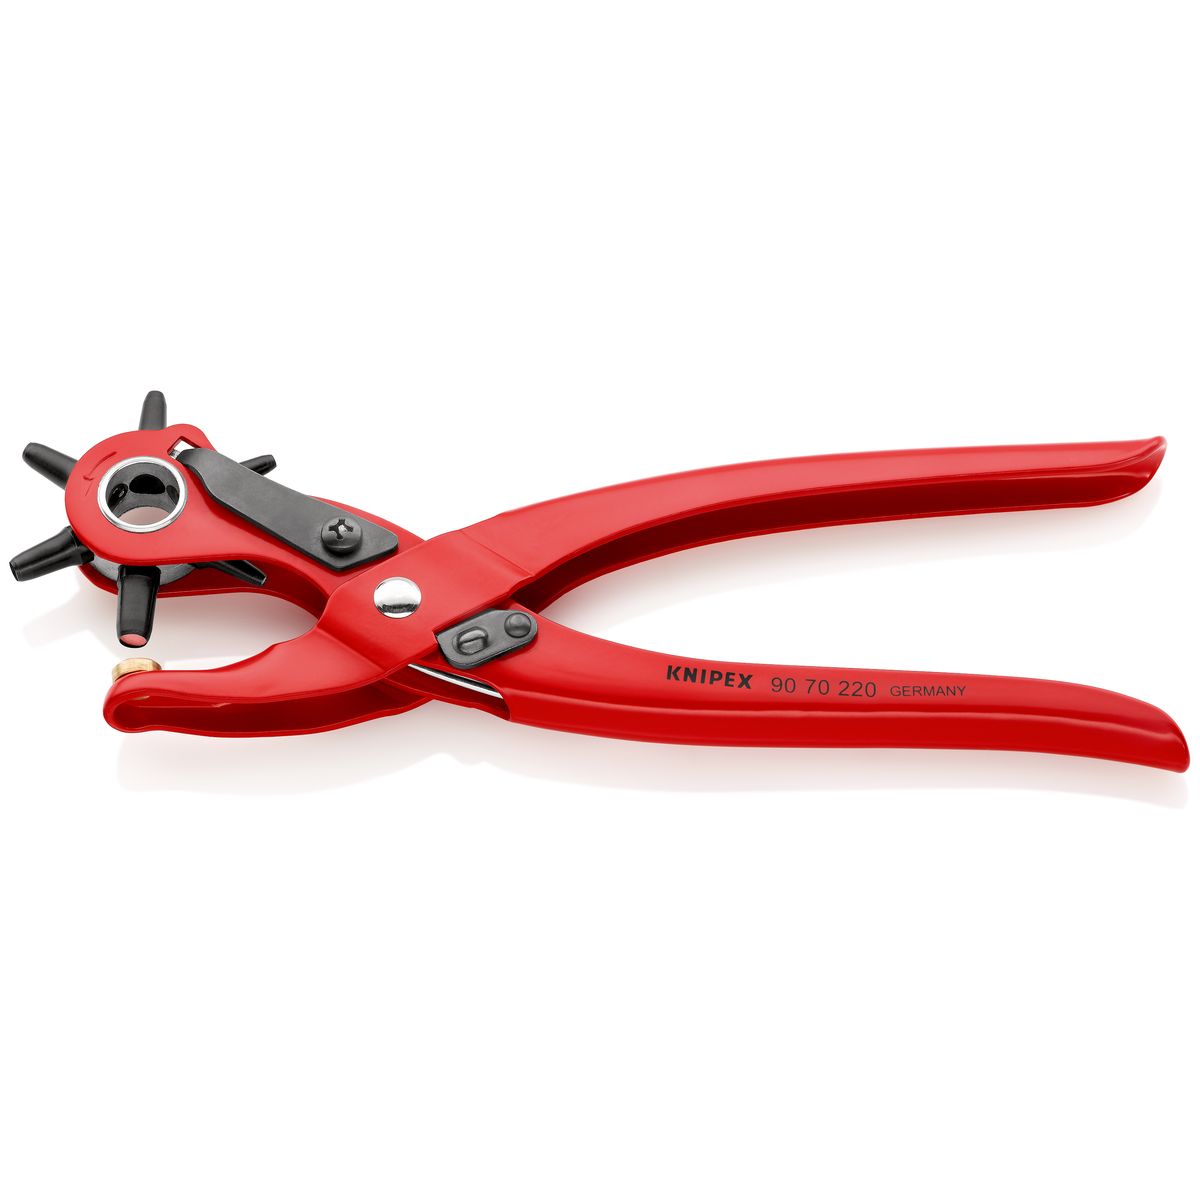 REVOLVING PUNCH PLIERS 9070220 Knipex